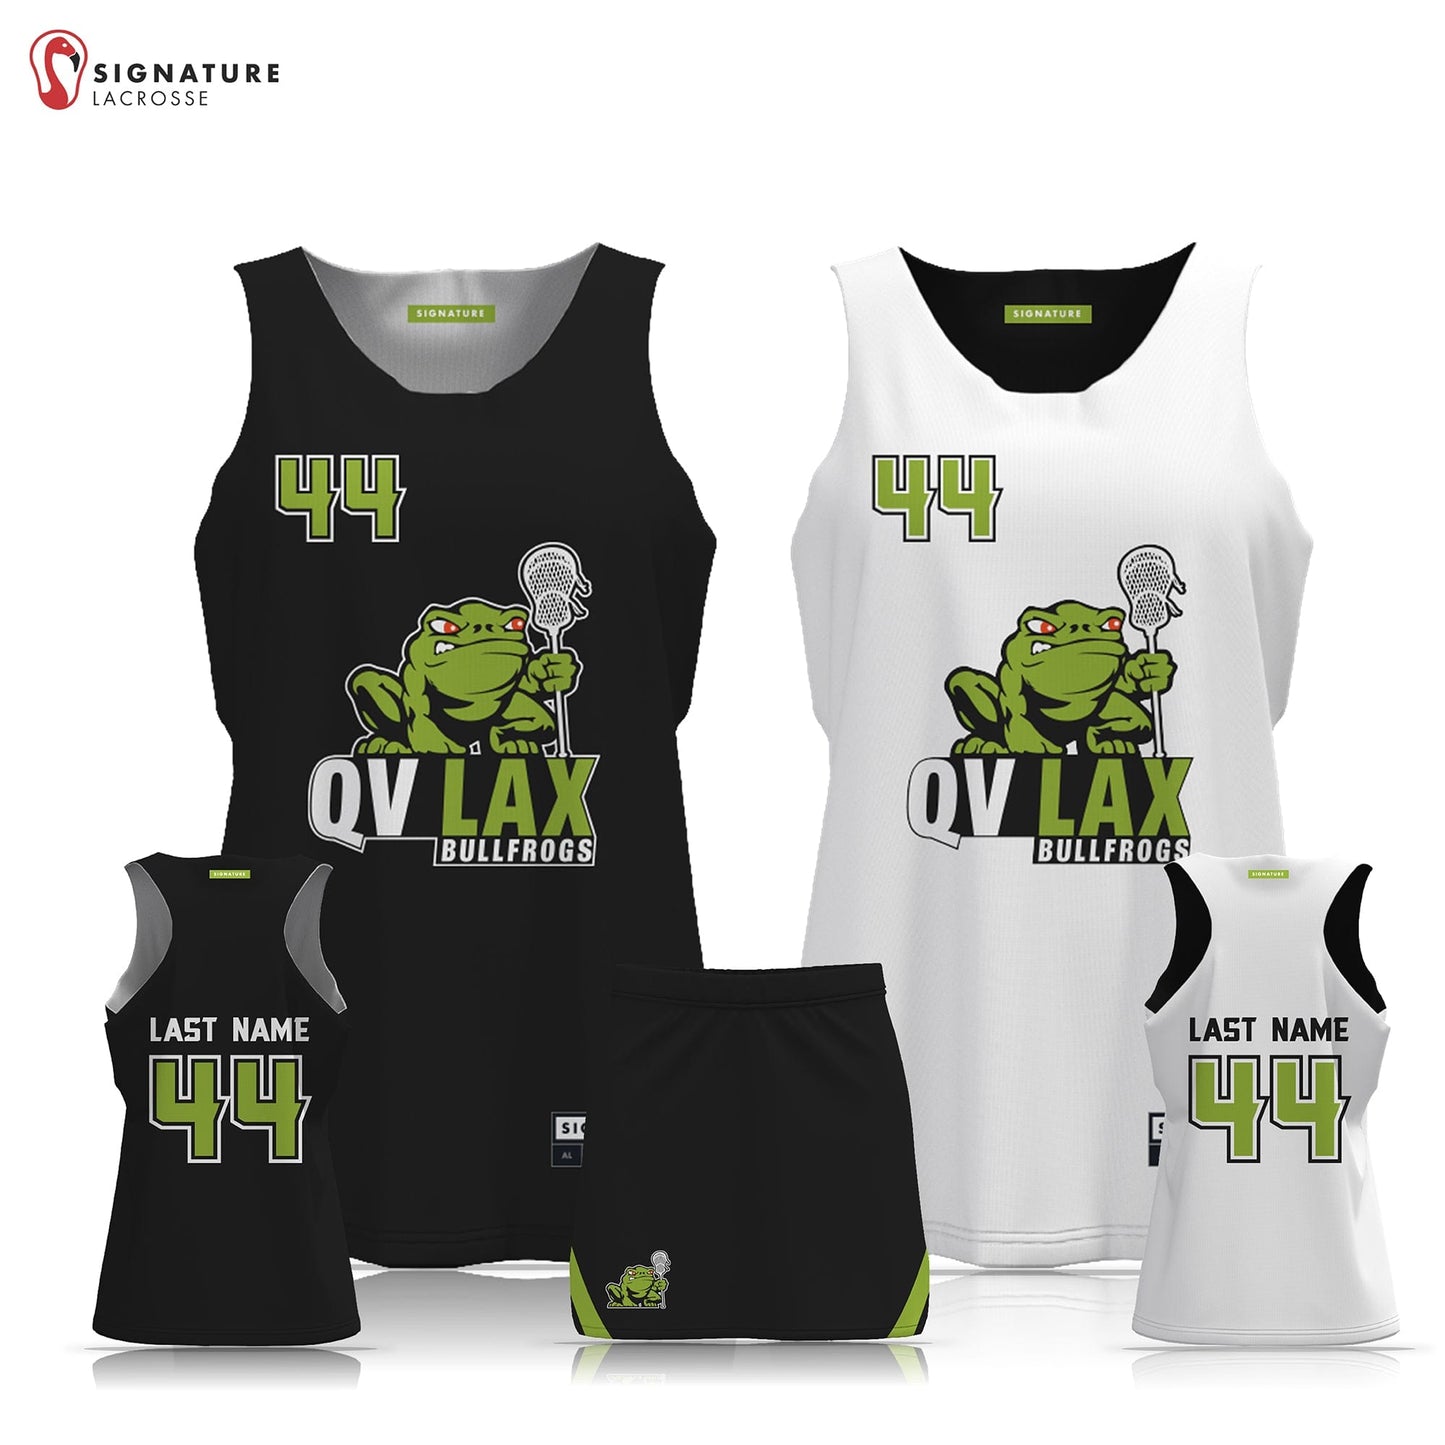 Quinebaug Valley Youth Lacrosse Women's 2 Piece Player Game Package: Quinebaug Signature Lacrosse